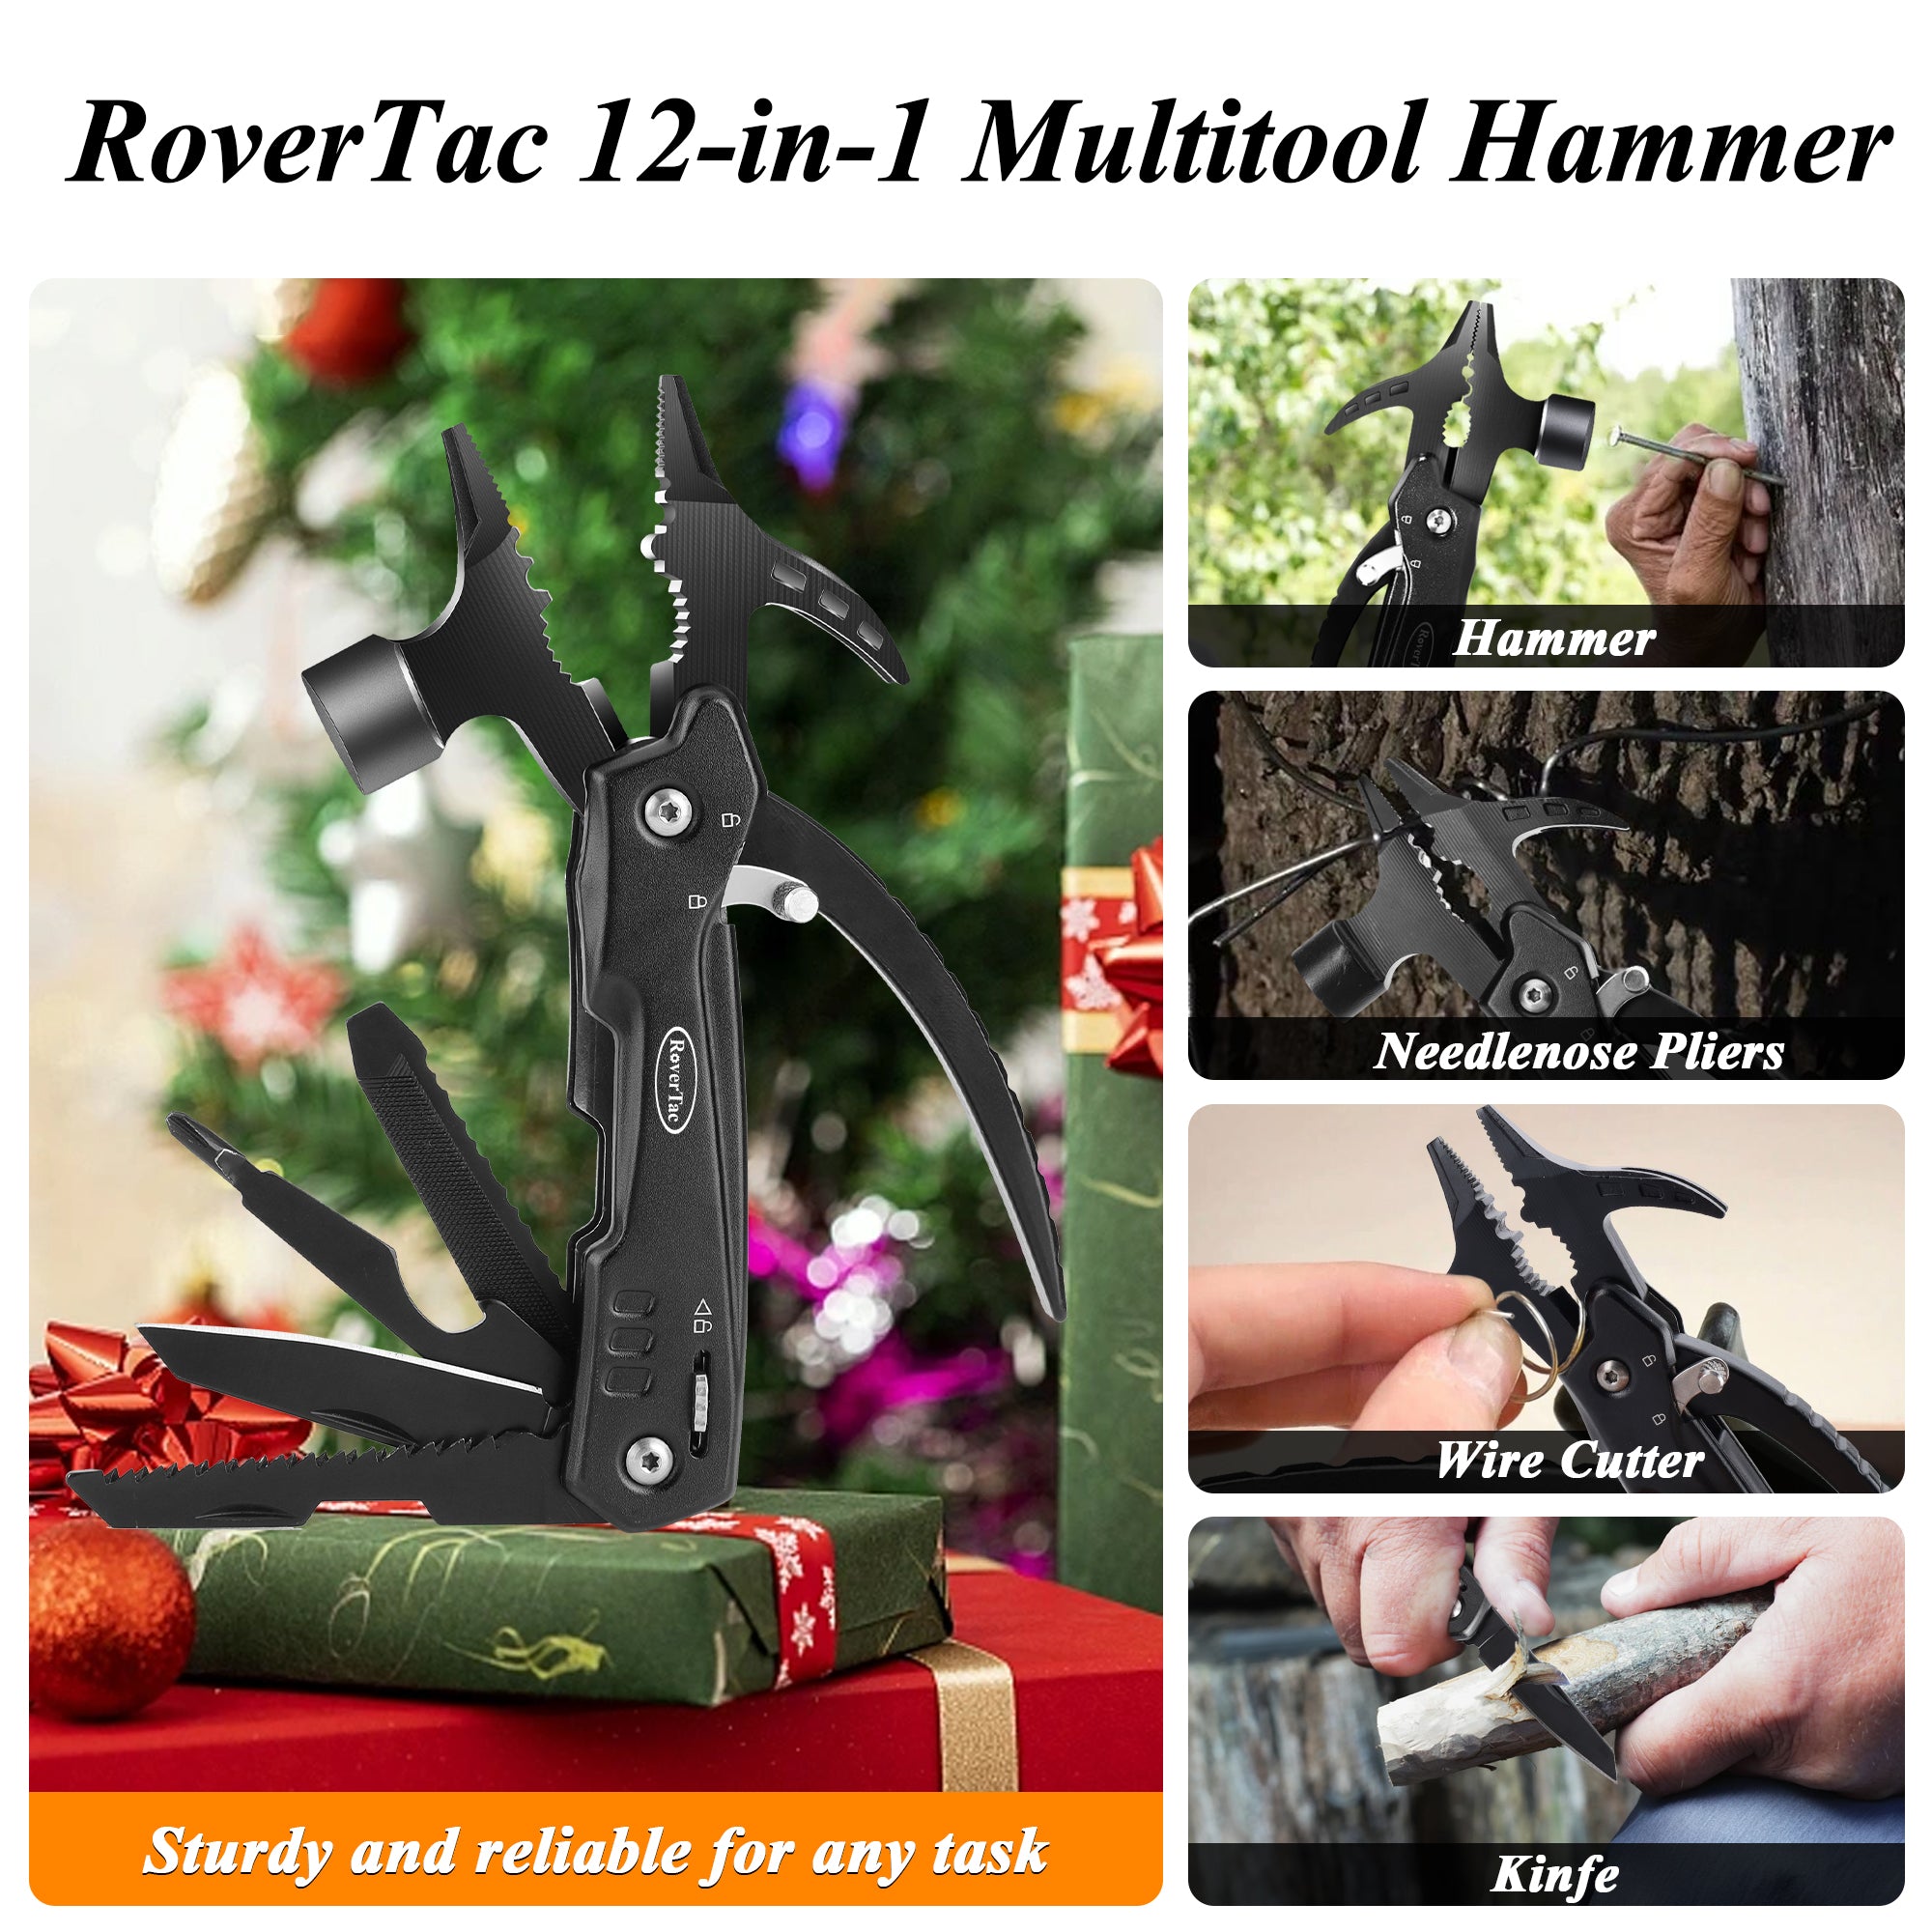 RoverTac Tool Set for Mens Gifts, Christmas Gifts for Men Women Dad Husband, Birthday Gifts, Christmas Stocking Stuffers for Men, 12 in 1 Multitool Hammer Box Cutter Snowflake, Christmas Gifts for Men